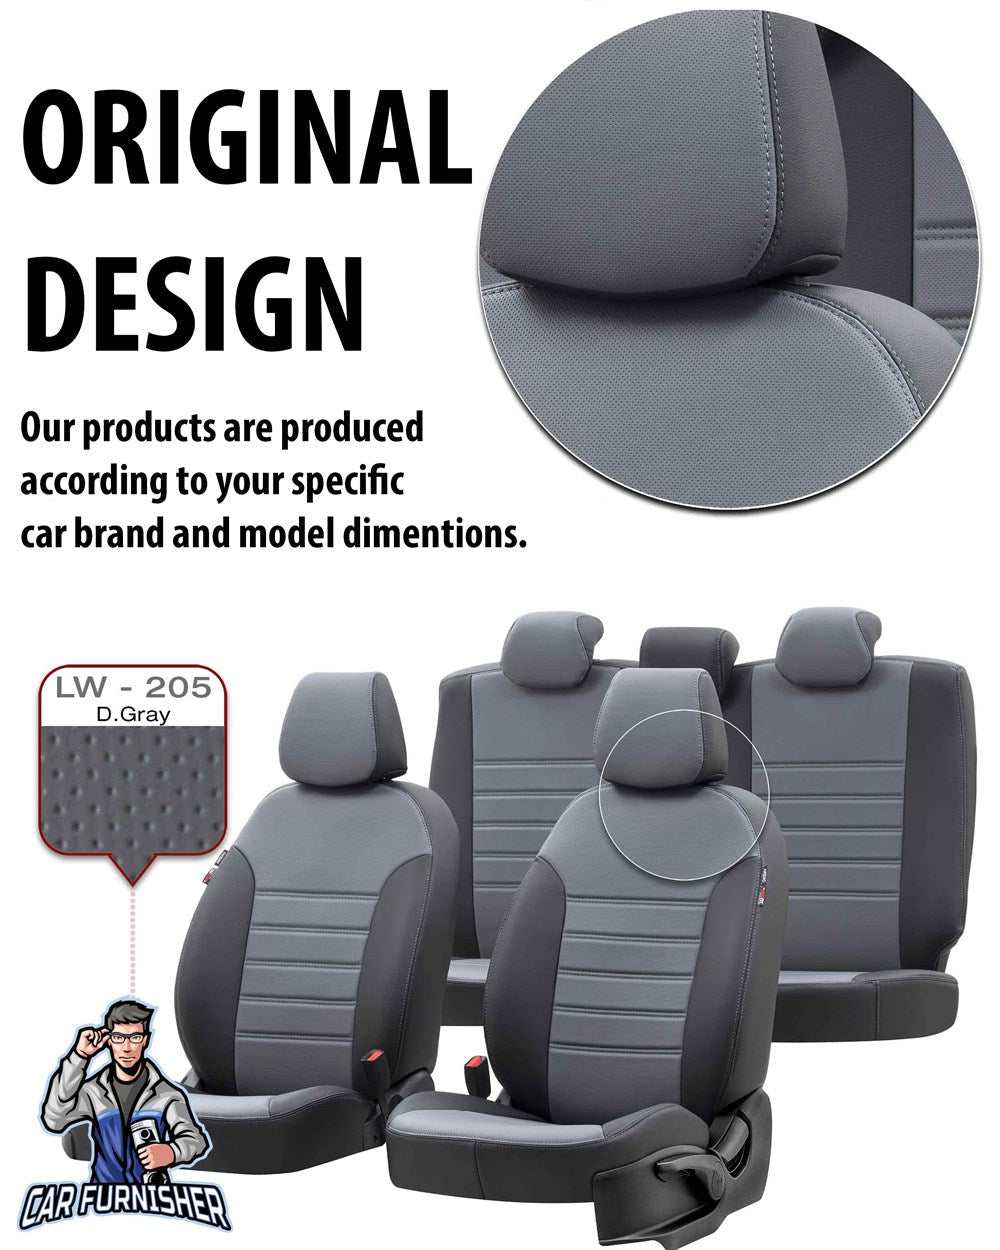 Volkswagen Amarok Seat Cover Istanbul Leather Design Smoked Black Leather